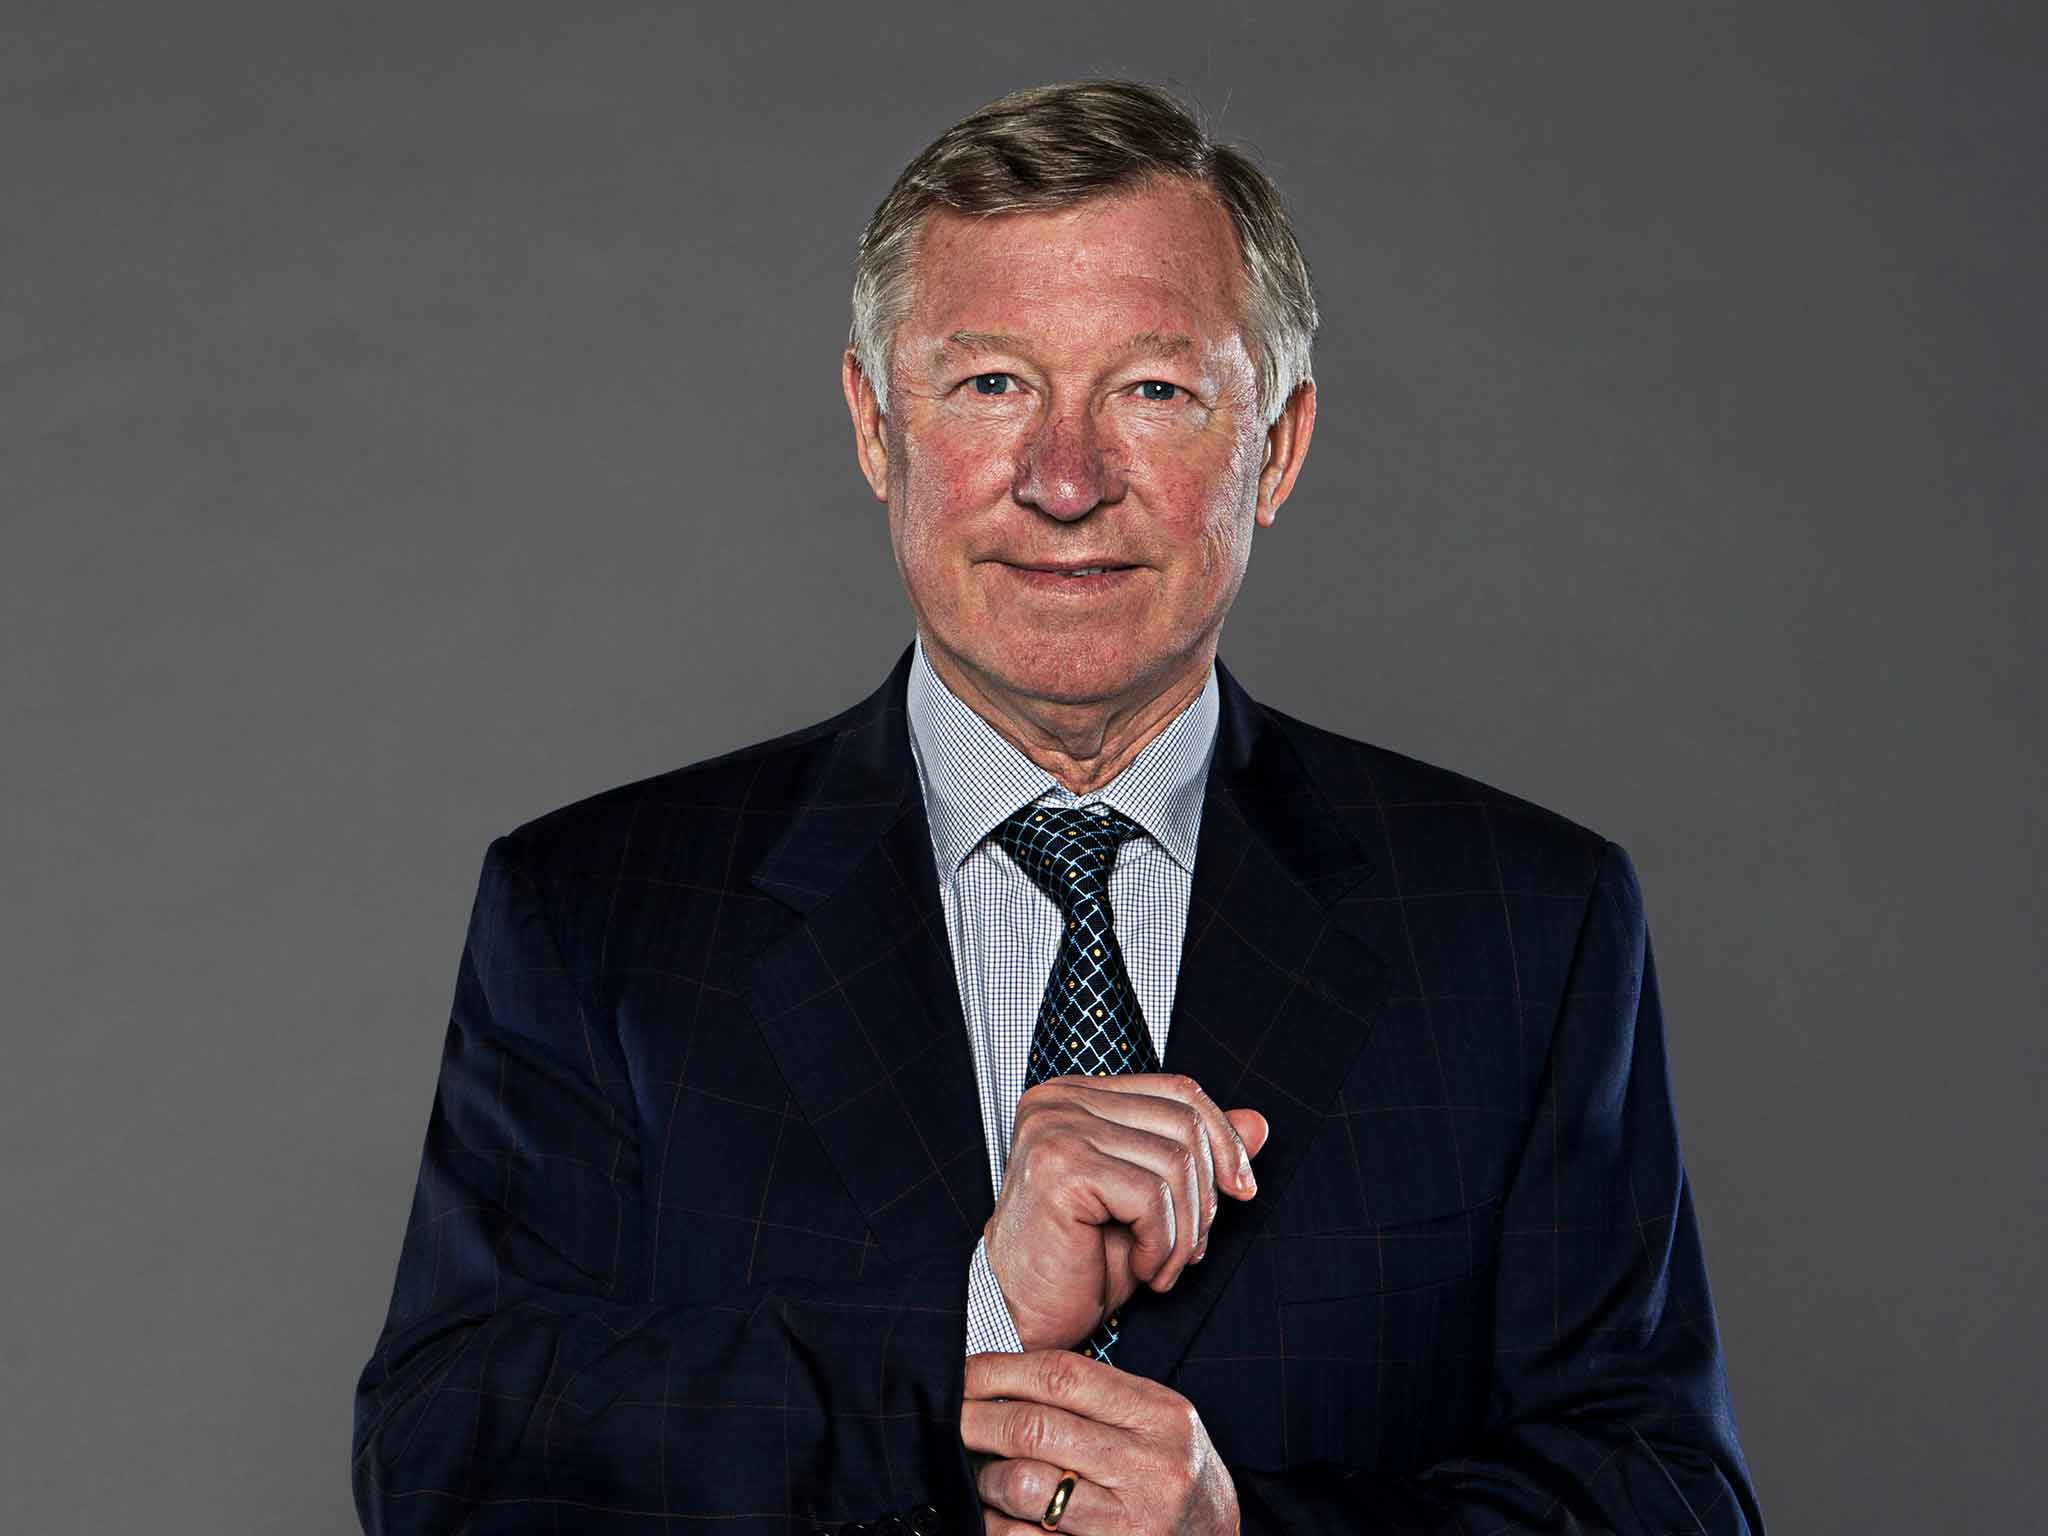 Sir Alex Ferguson speaks publicly for first time since